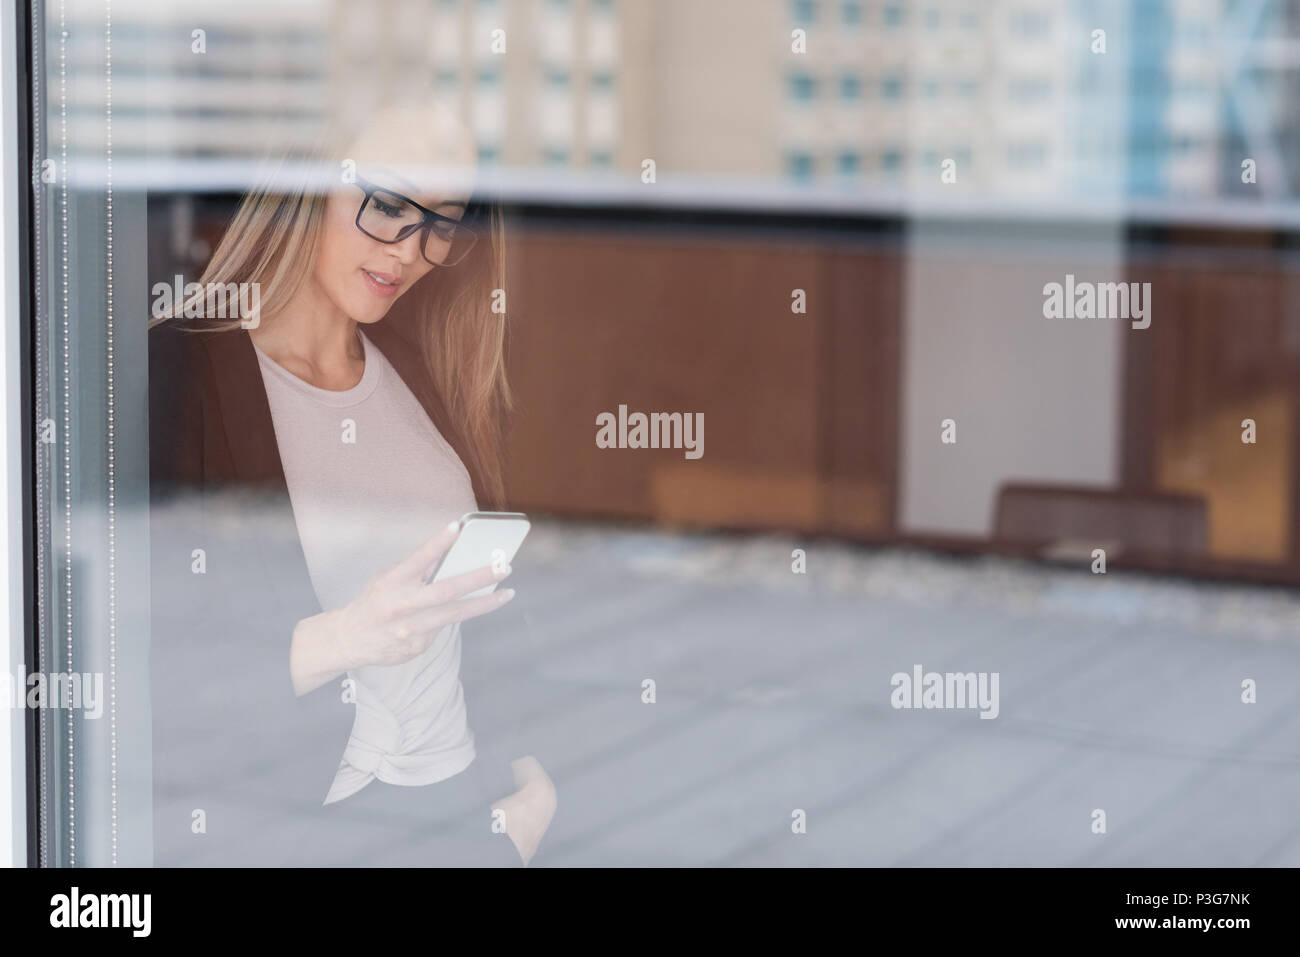 Asian businesswoman wearing spectacles using her mobile phone Stock Photo